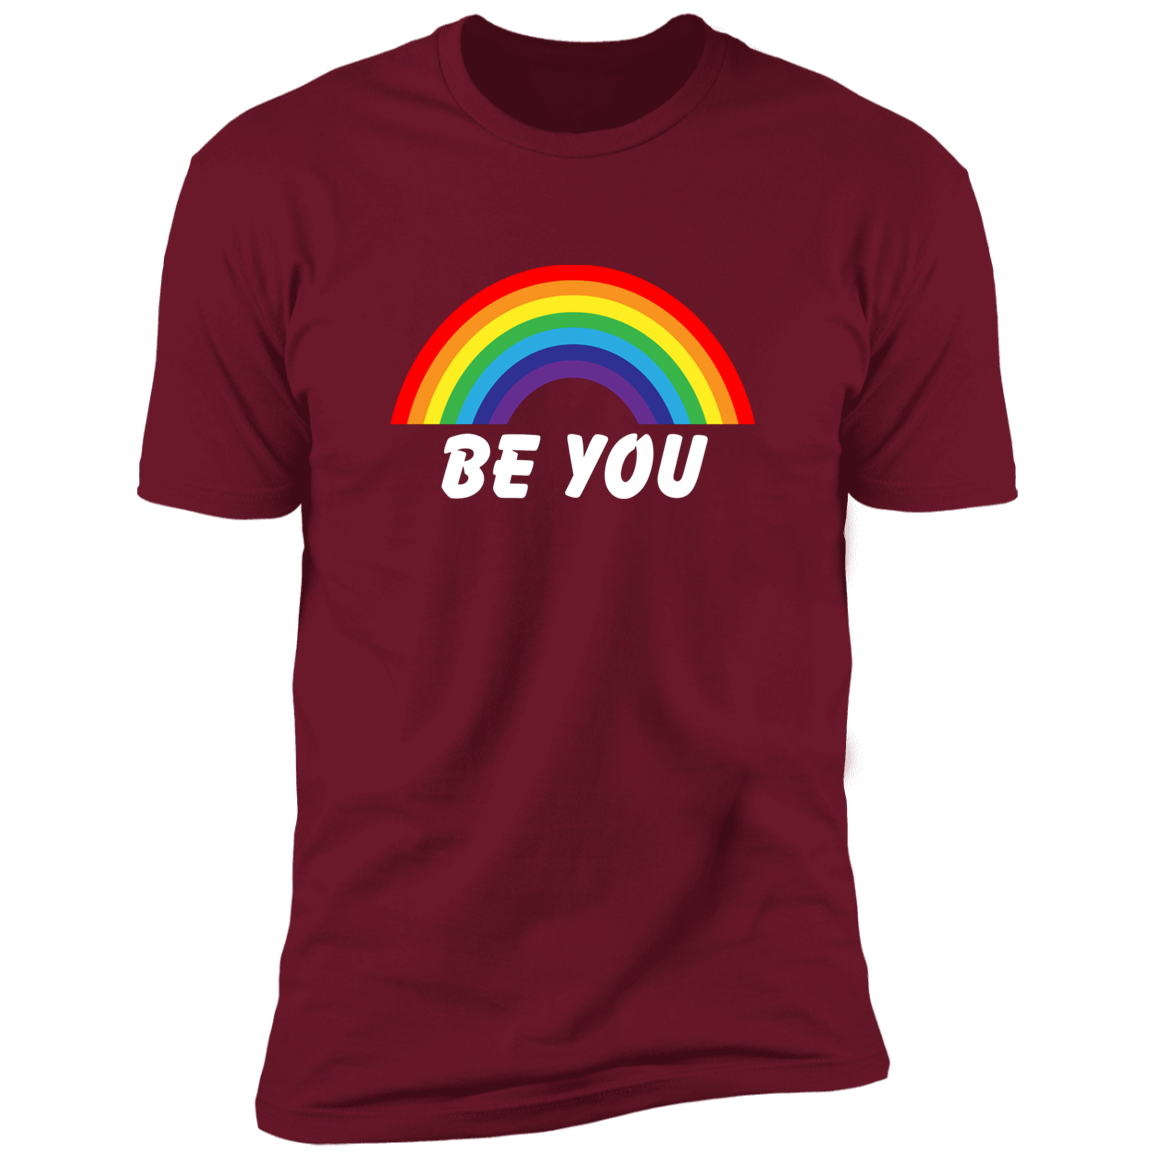 BE YOU Pride Tee!